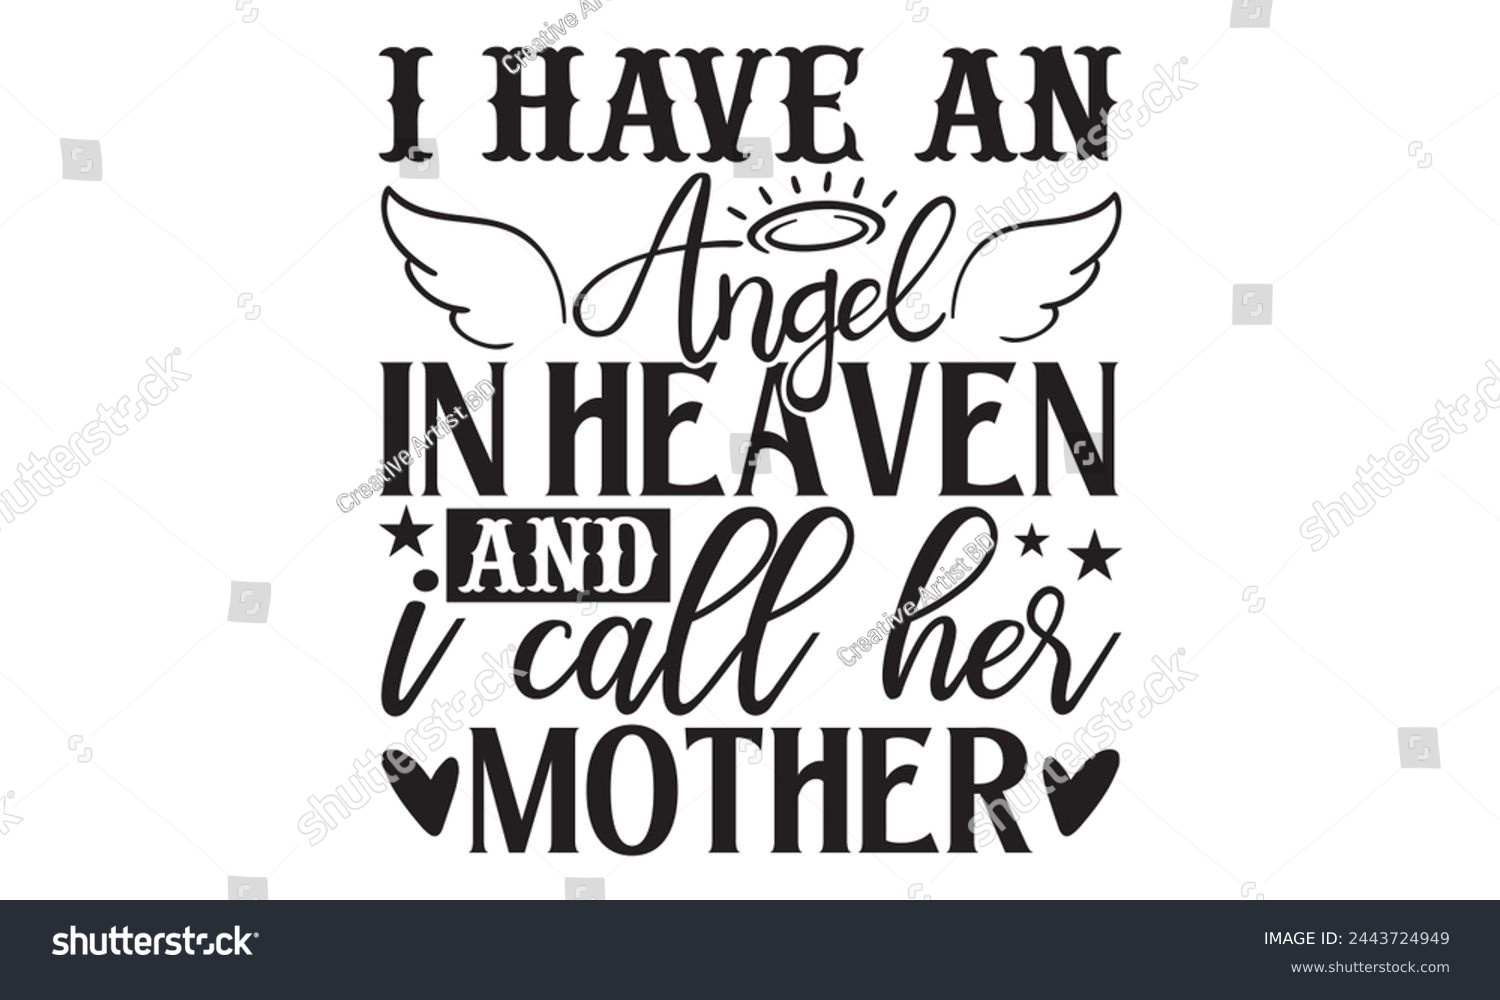 SVG of I Have An Angel In Heaven And I Call Her Mother - Memorial T shirt Design, Handmade calligraphy vector illustration, Cutting and Silhouette, for prints on bags, cups, card, posters. svg